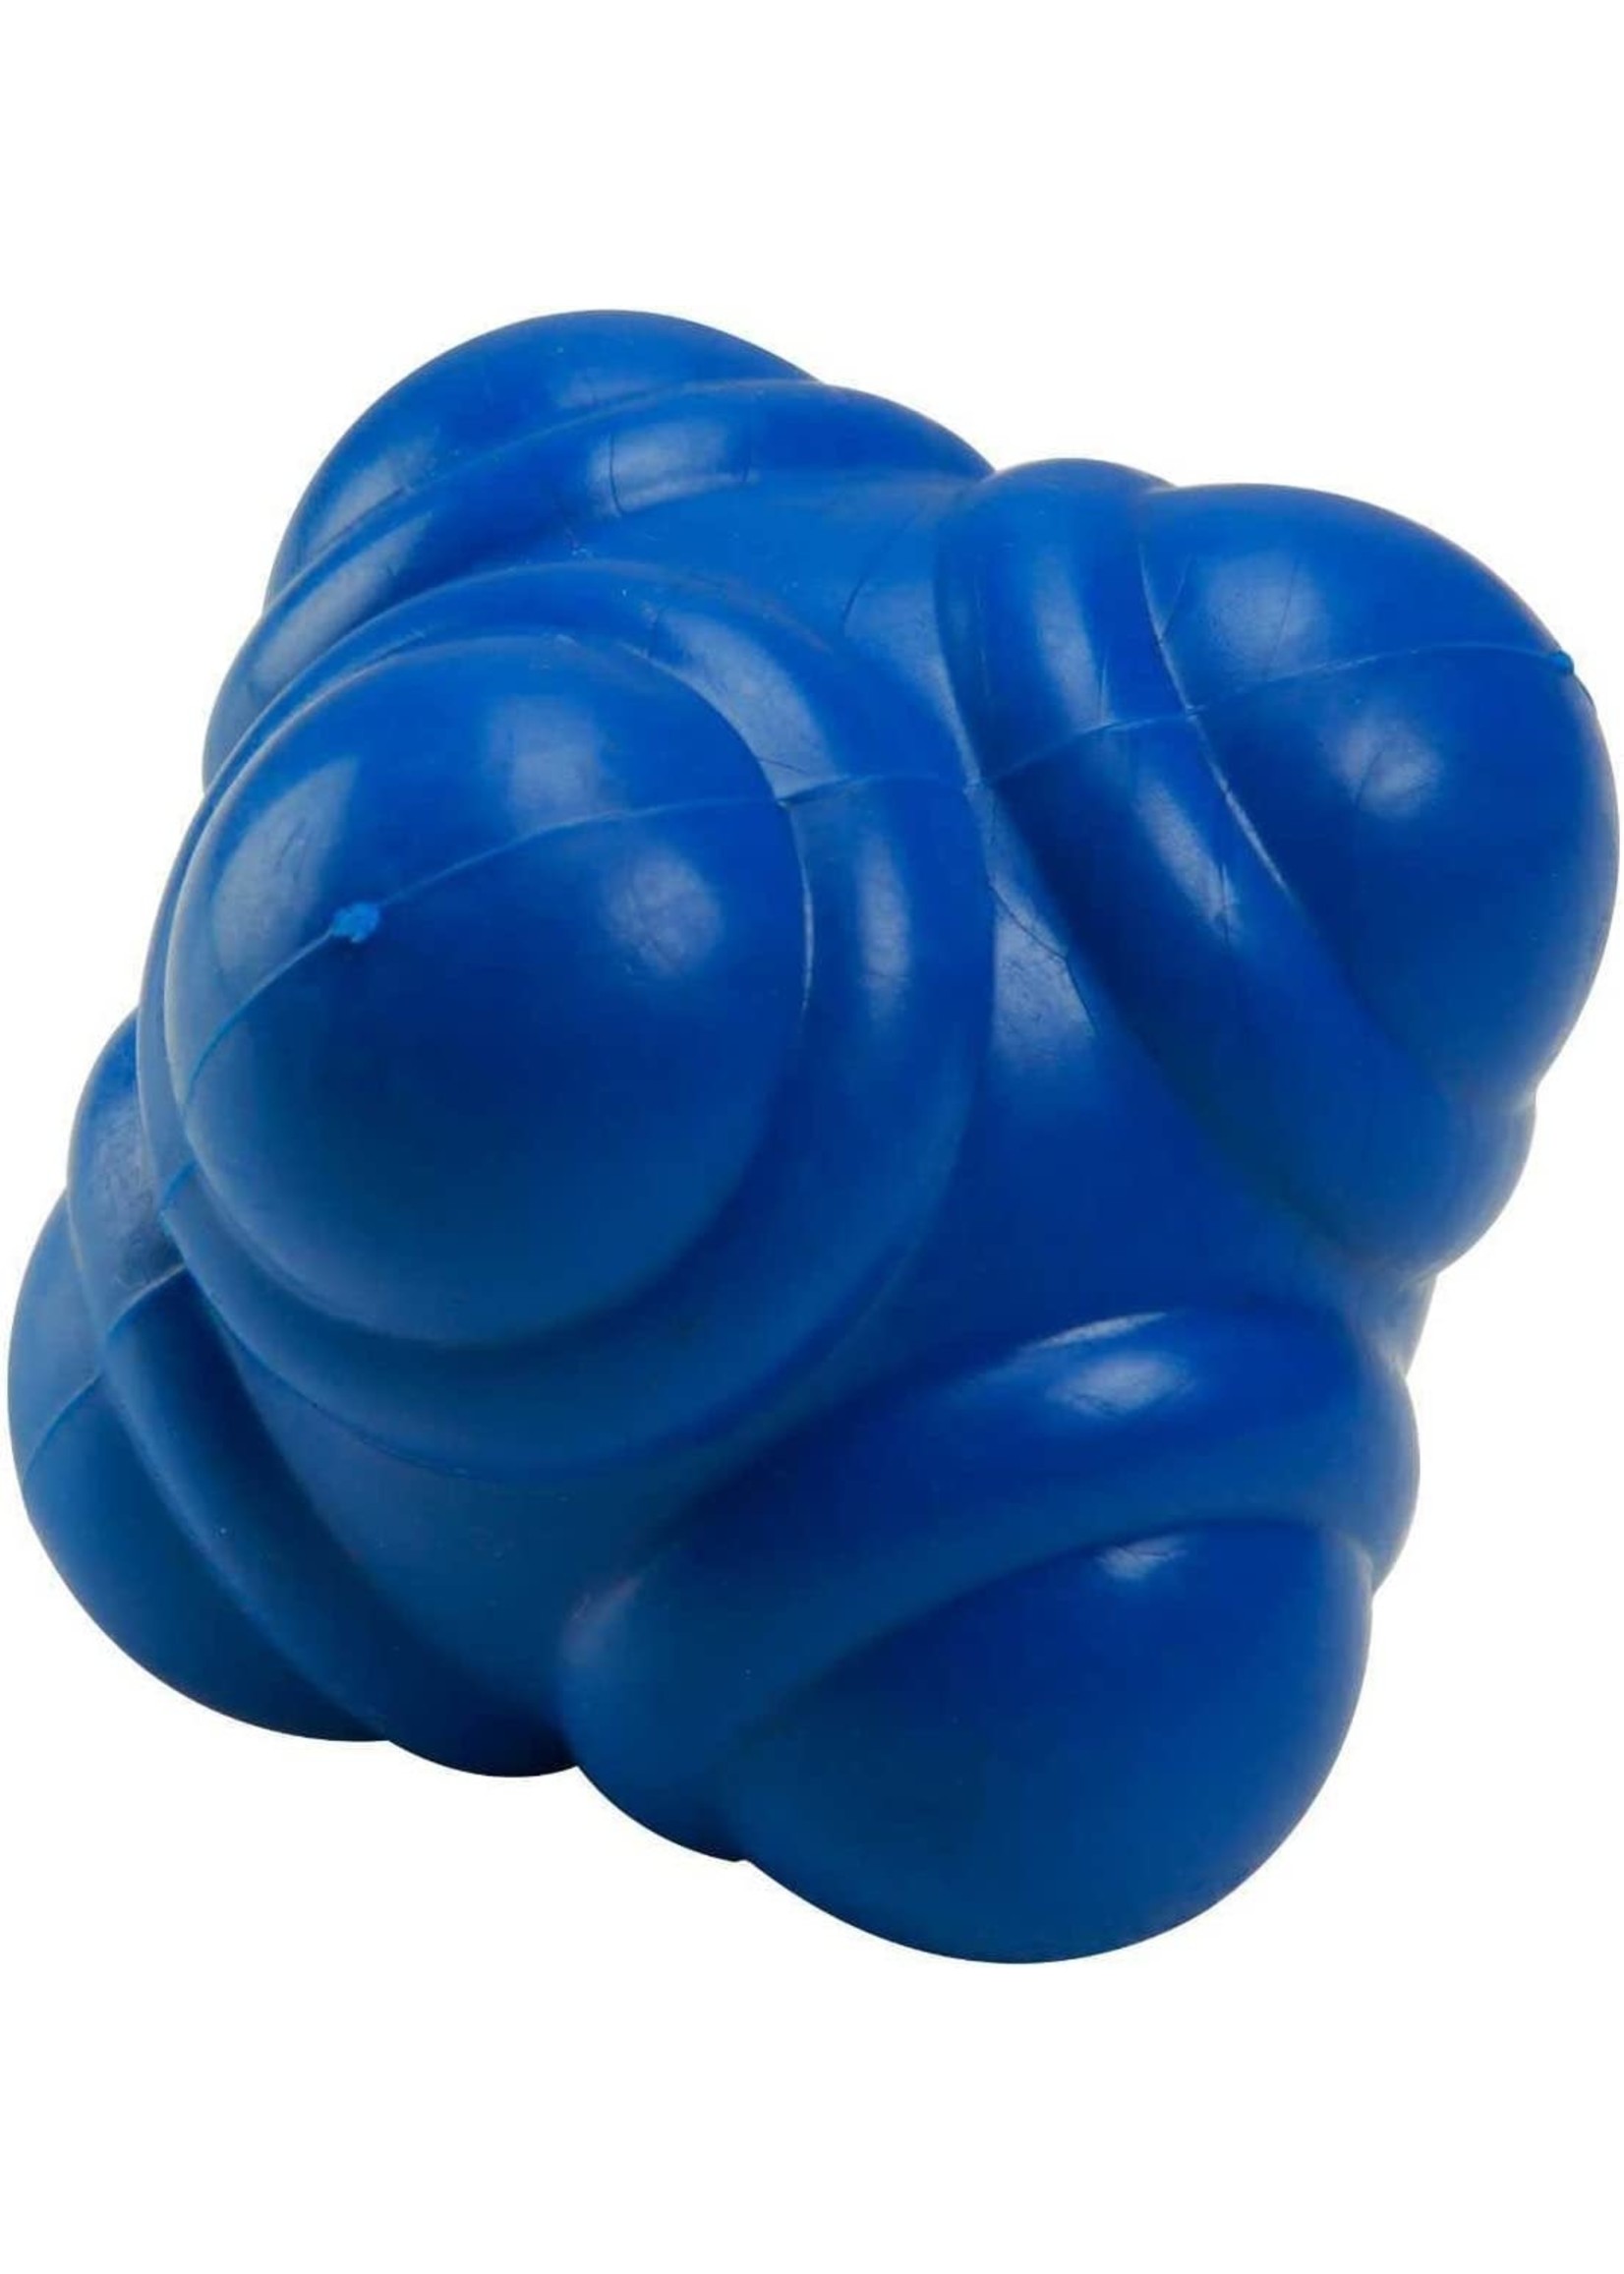 SIDELINES REACTION BALL BLISTER SMALL BLUE/GREEN/RED